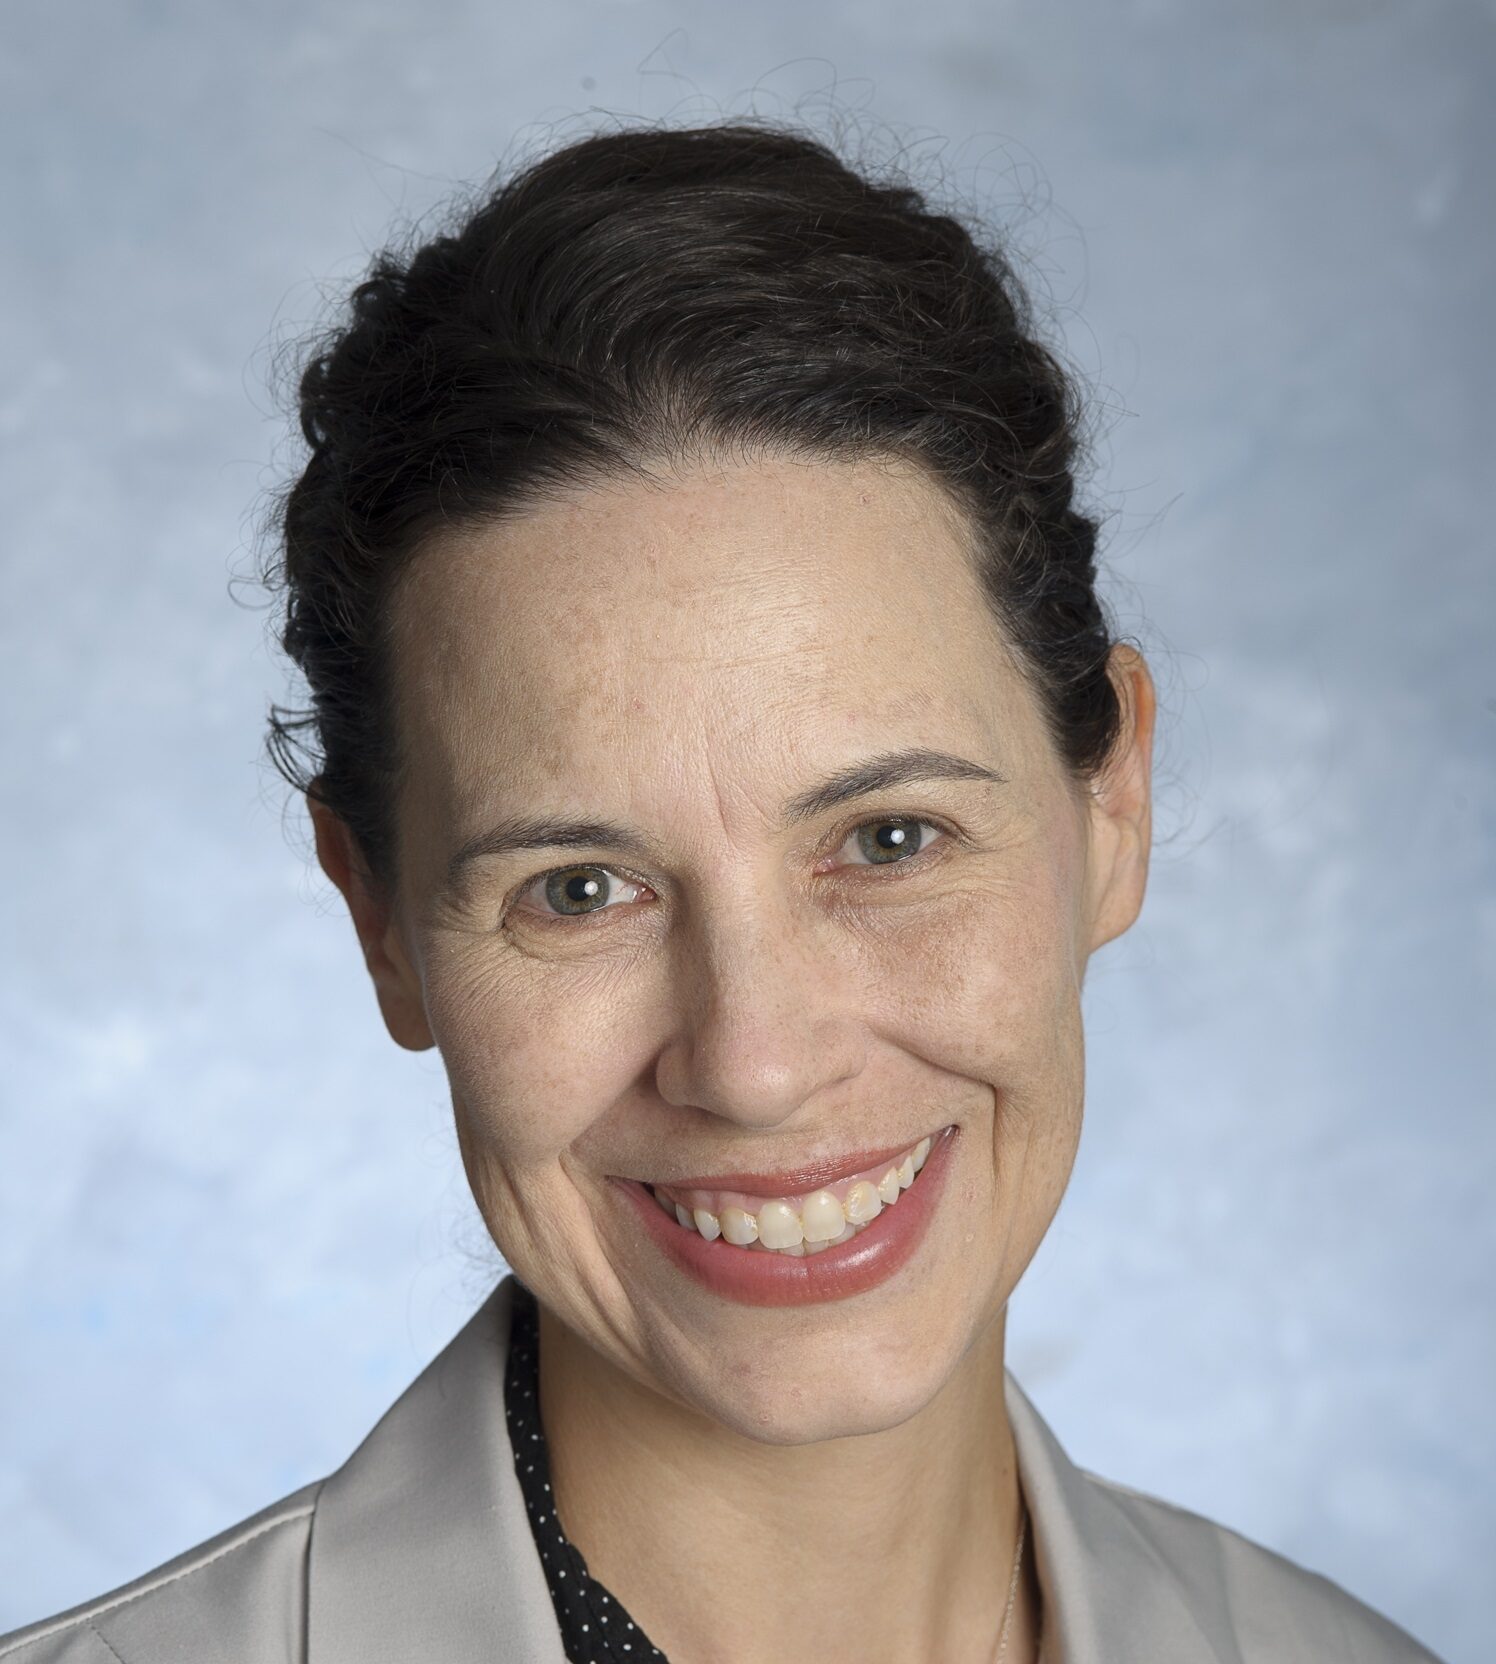 Ann Borders is the executive director and obstetric lead at NorthShore University HealthSystem and Evanston Hospital.